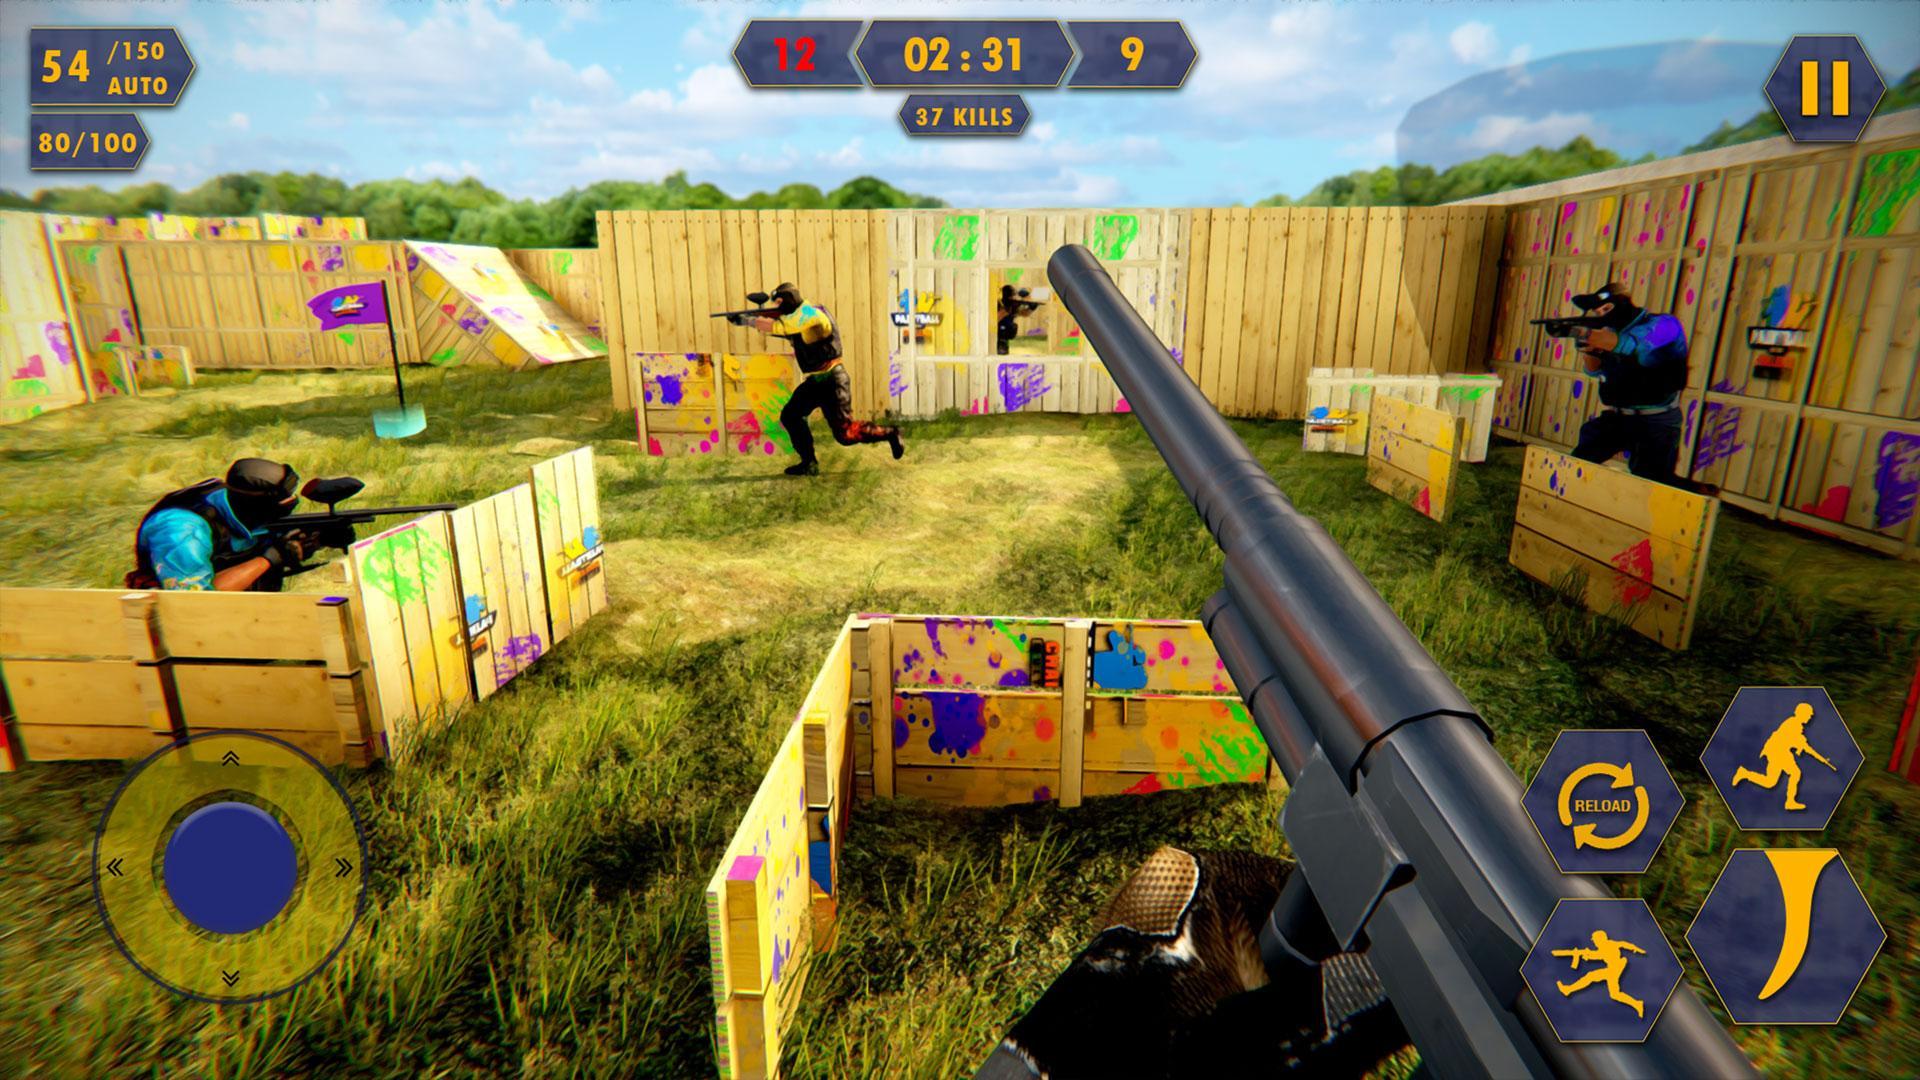 Paintball Arena Challenge 2 Multiplayer Battle For Android Apk Download - tdm team deathmatch arena roblox